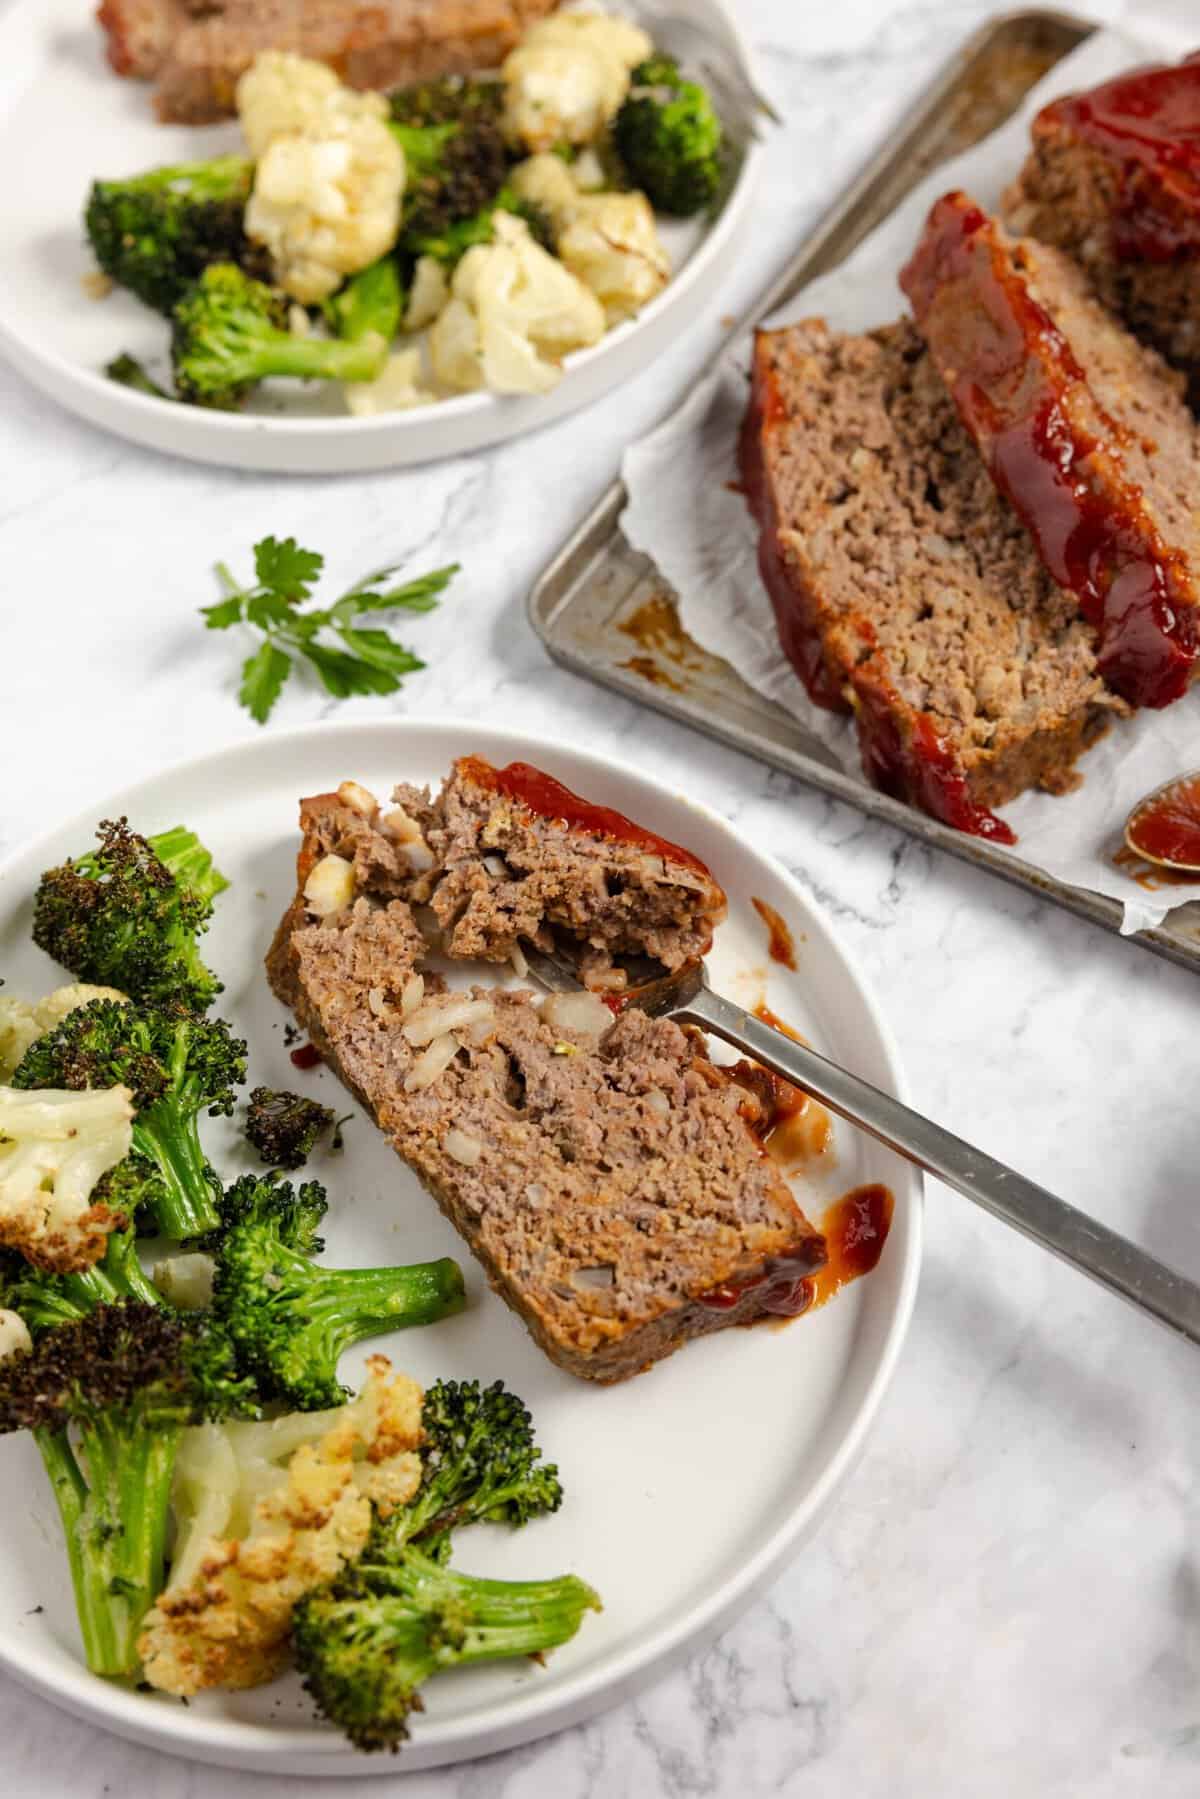 A plate with a slice of meatloaf and veggies on the side next to a platter with the rest of the meatloaf